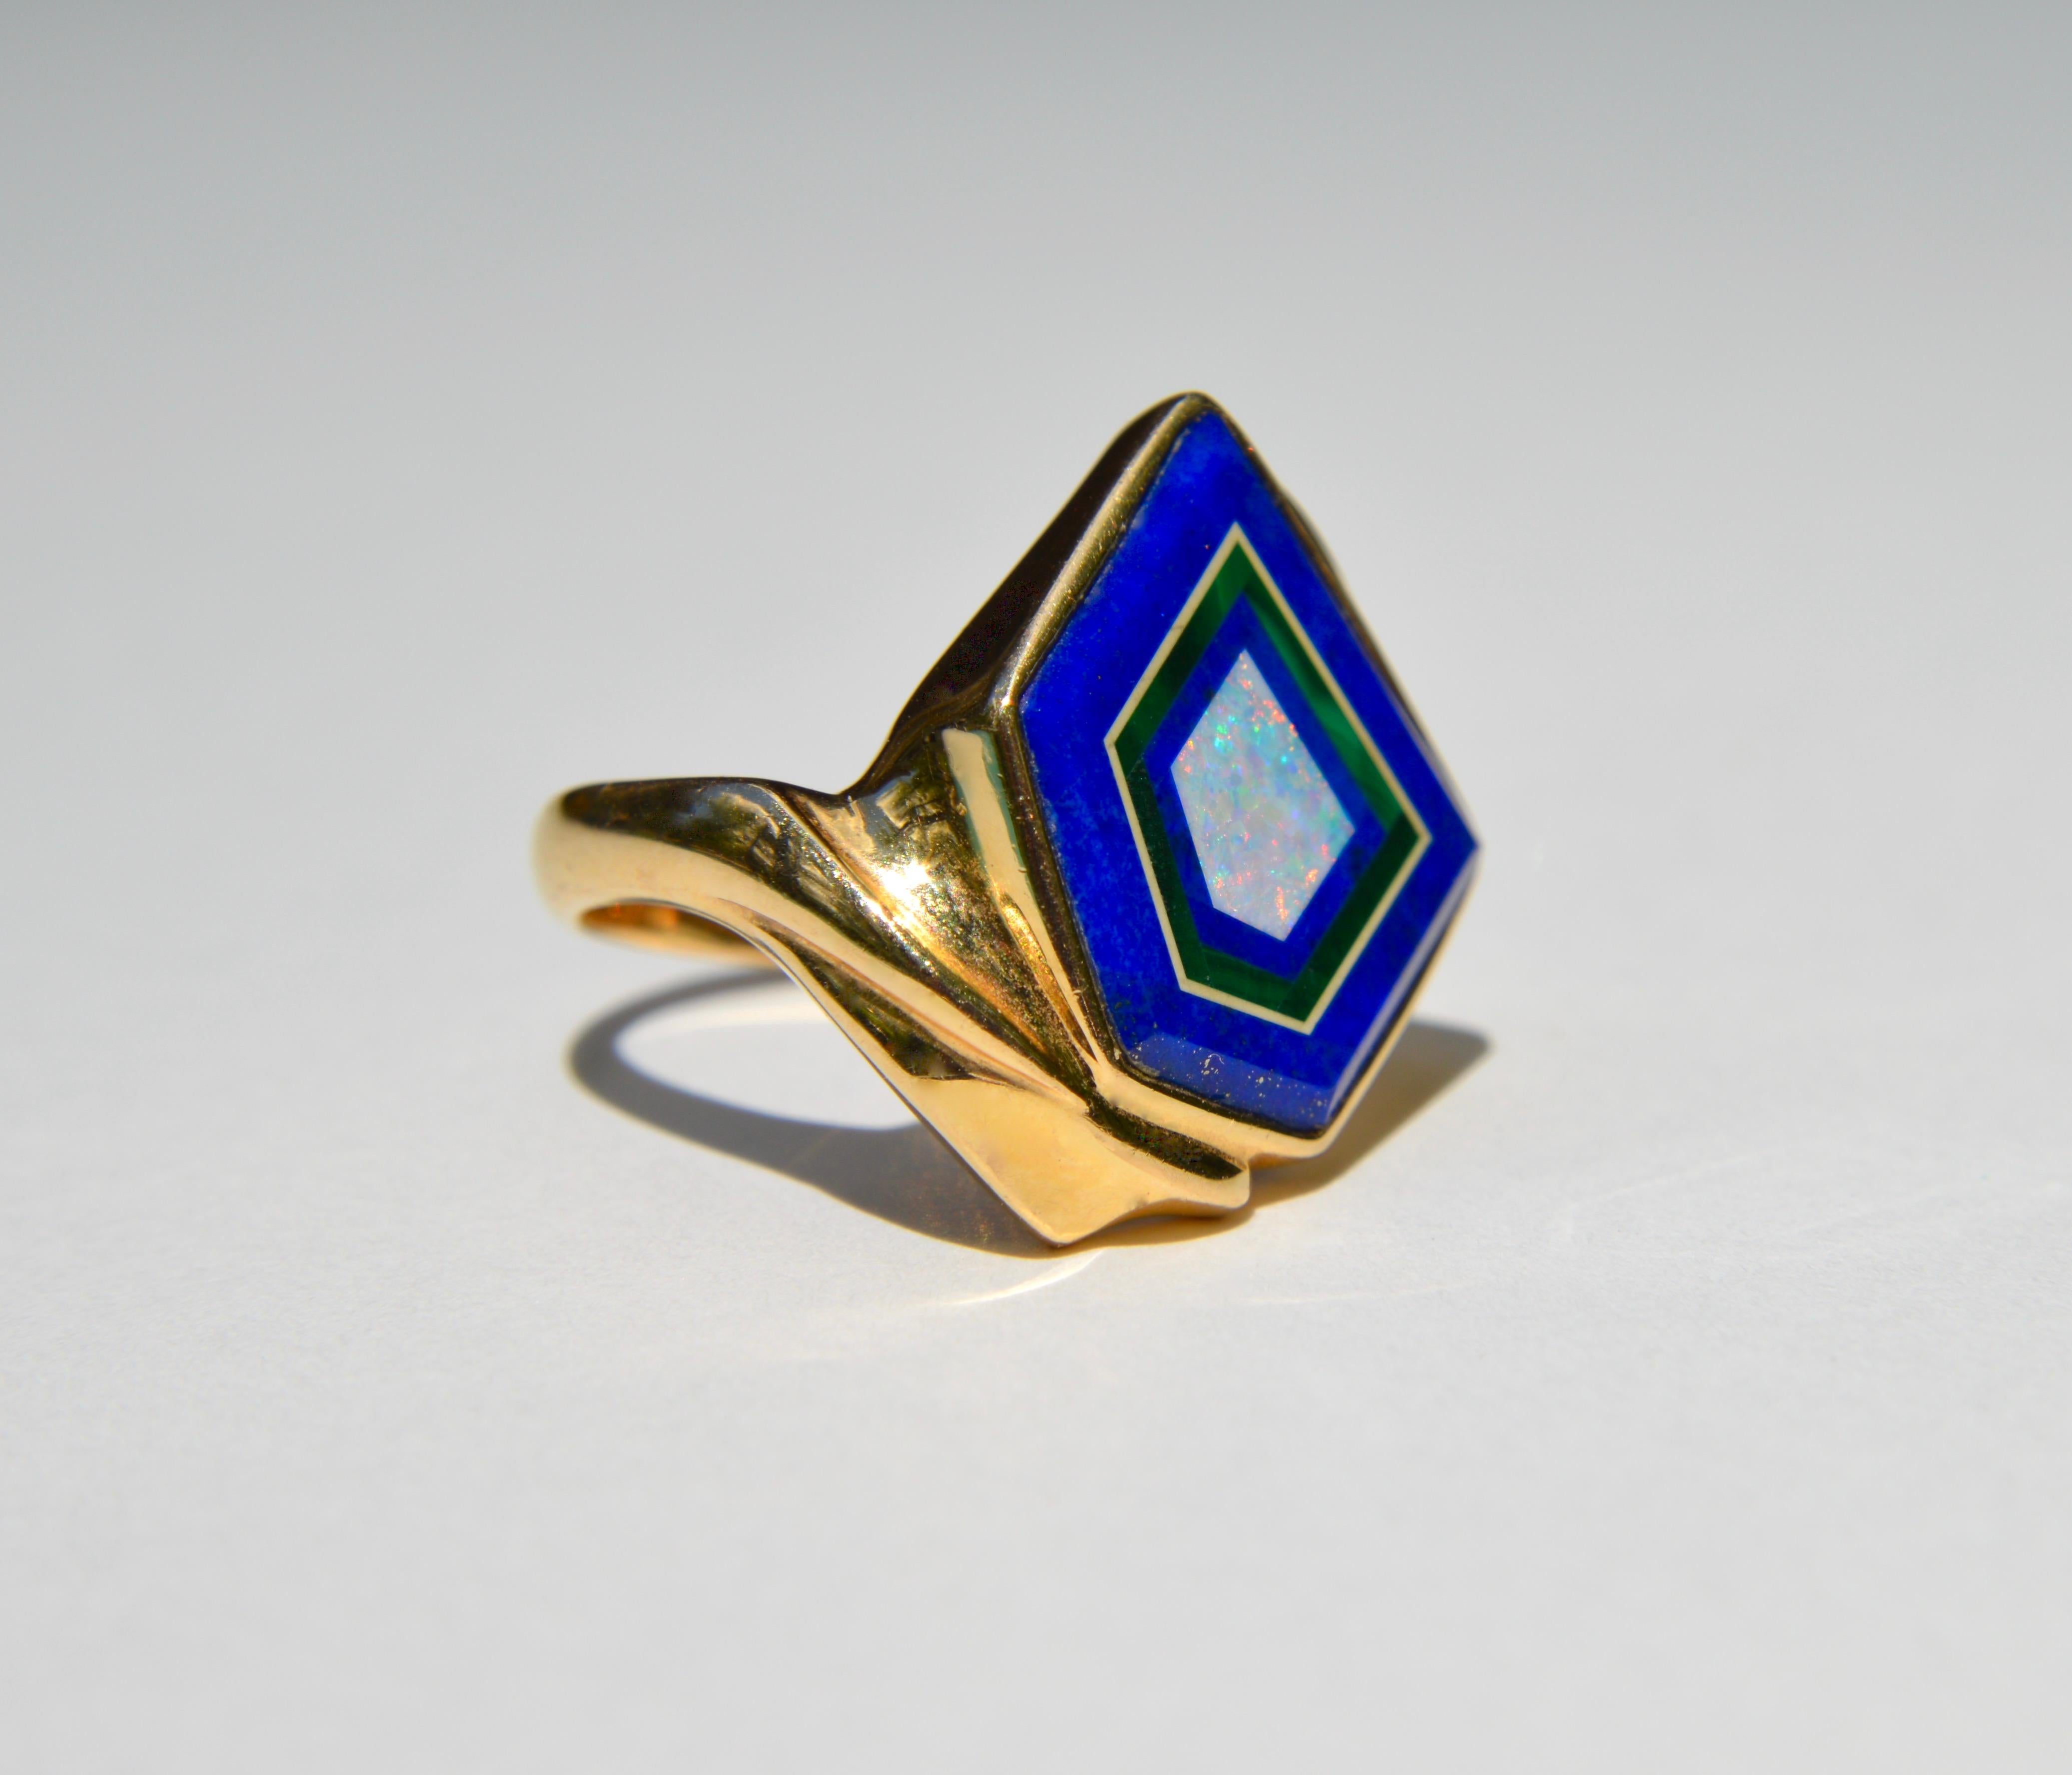 Gorgeous vintage Midcentury era circa 1970s 14K yellow gold geometric inlay ring featuring lapis lazuli with pyrite flecks, malachite, Australian opal, and 3 diamond accents on one shoulder. Marked and tested as 14K gold. In excellent  condition.